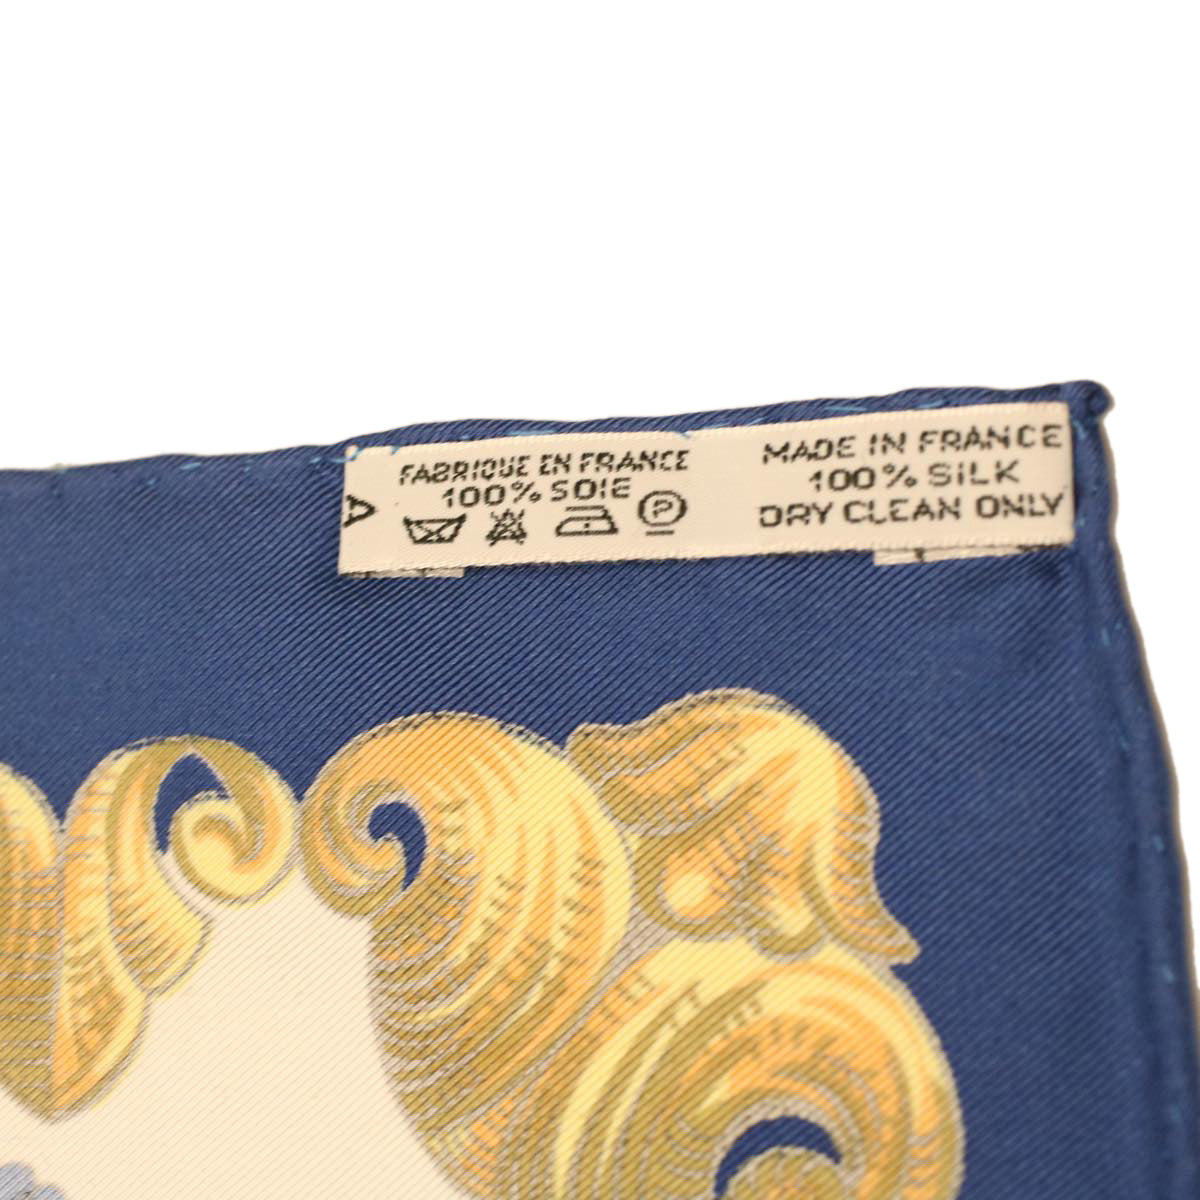 HERMES Carre 90 LVDOVICVS MAGNVS Scarf Silk Blue Yellow Auth 36788